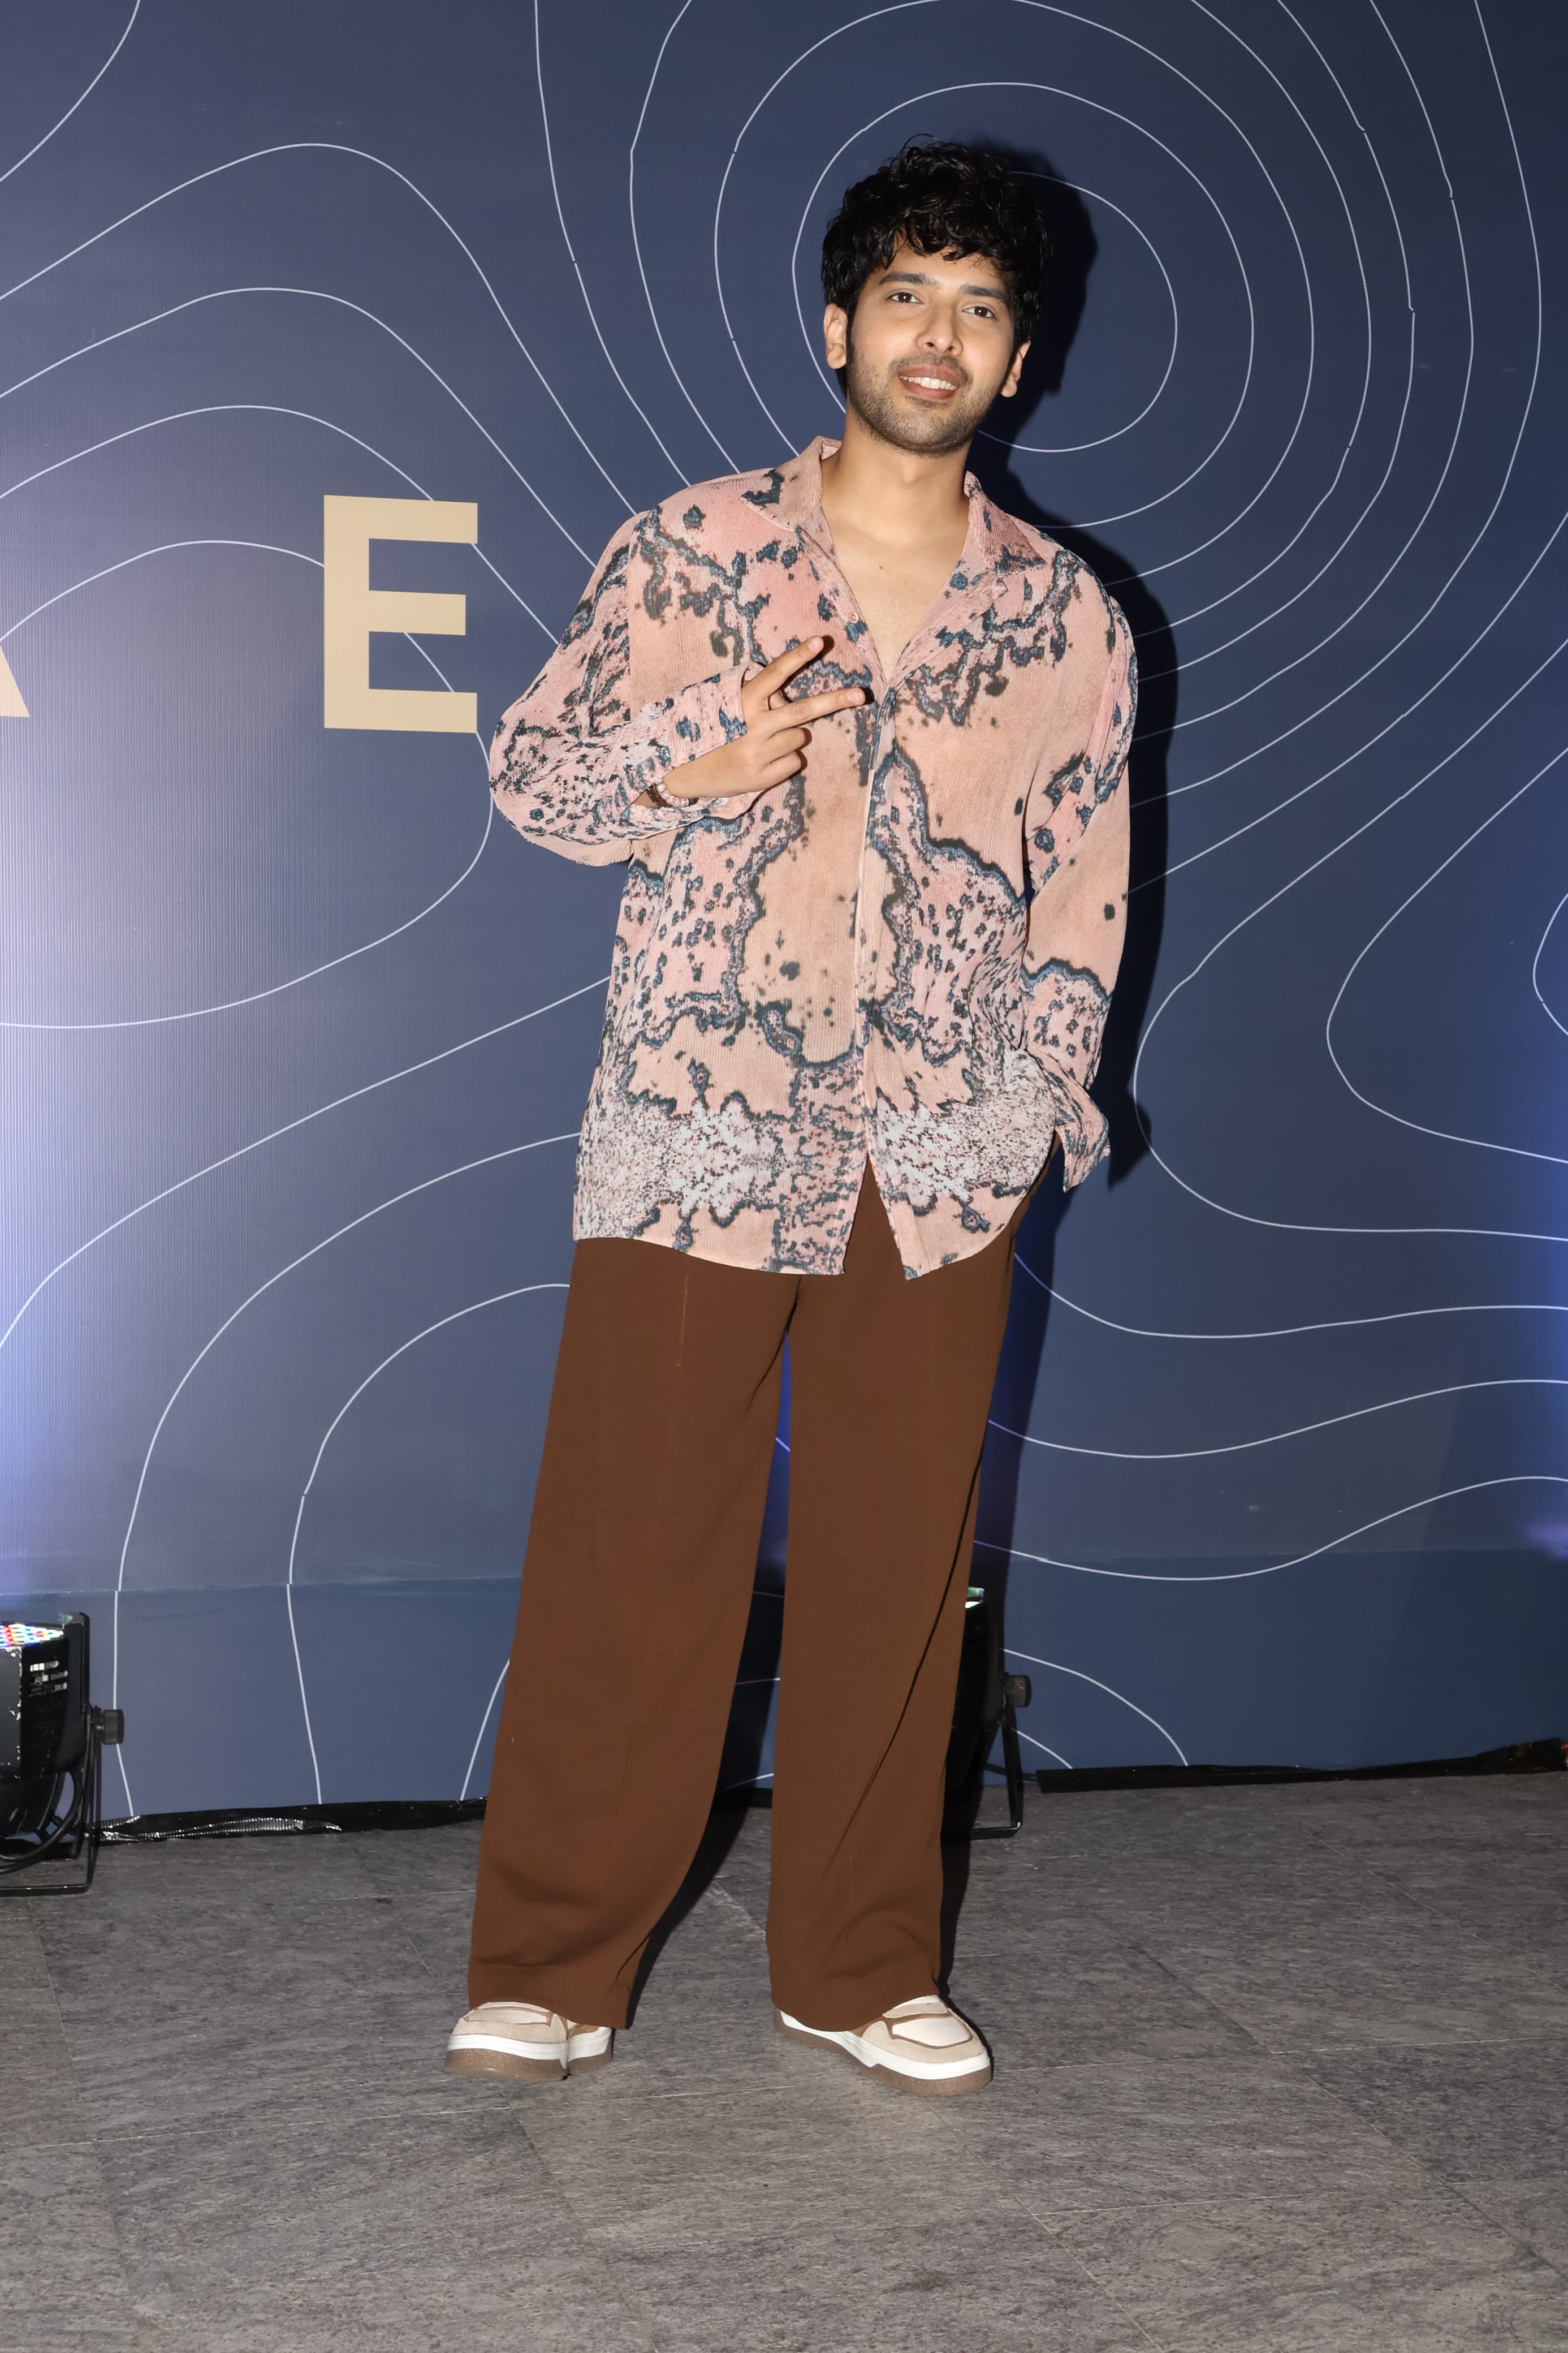 Armaan Malik's funky printed shirt brought such a fun element to the dress code of the night